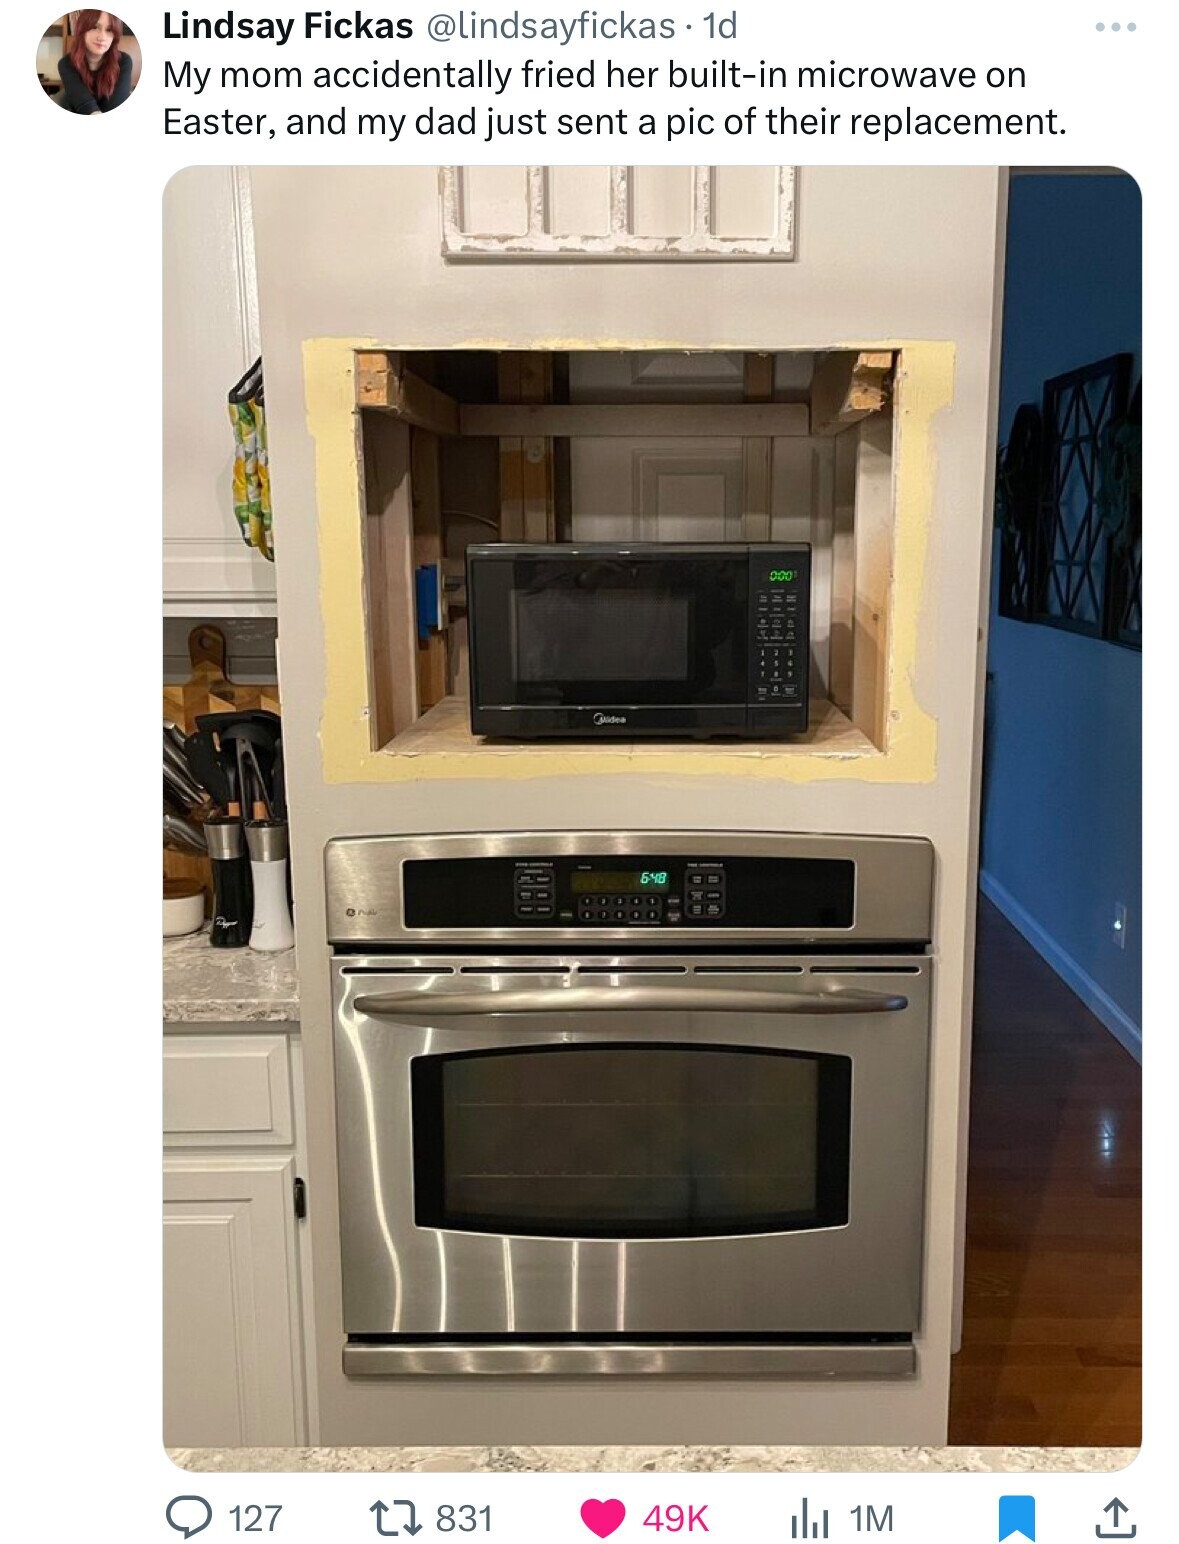 kitchen - Lindsay Fickas . 1d My mom accidentally fried her builtin microwave on Easter, and my dad just sent a pic of their replacement. 1888 Gidea 648 127 Iii 1M